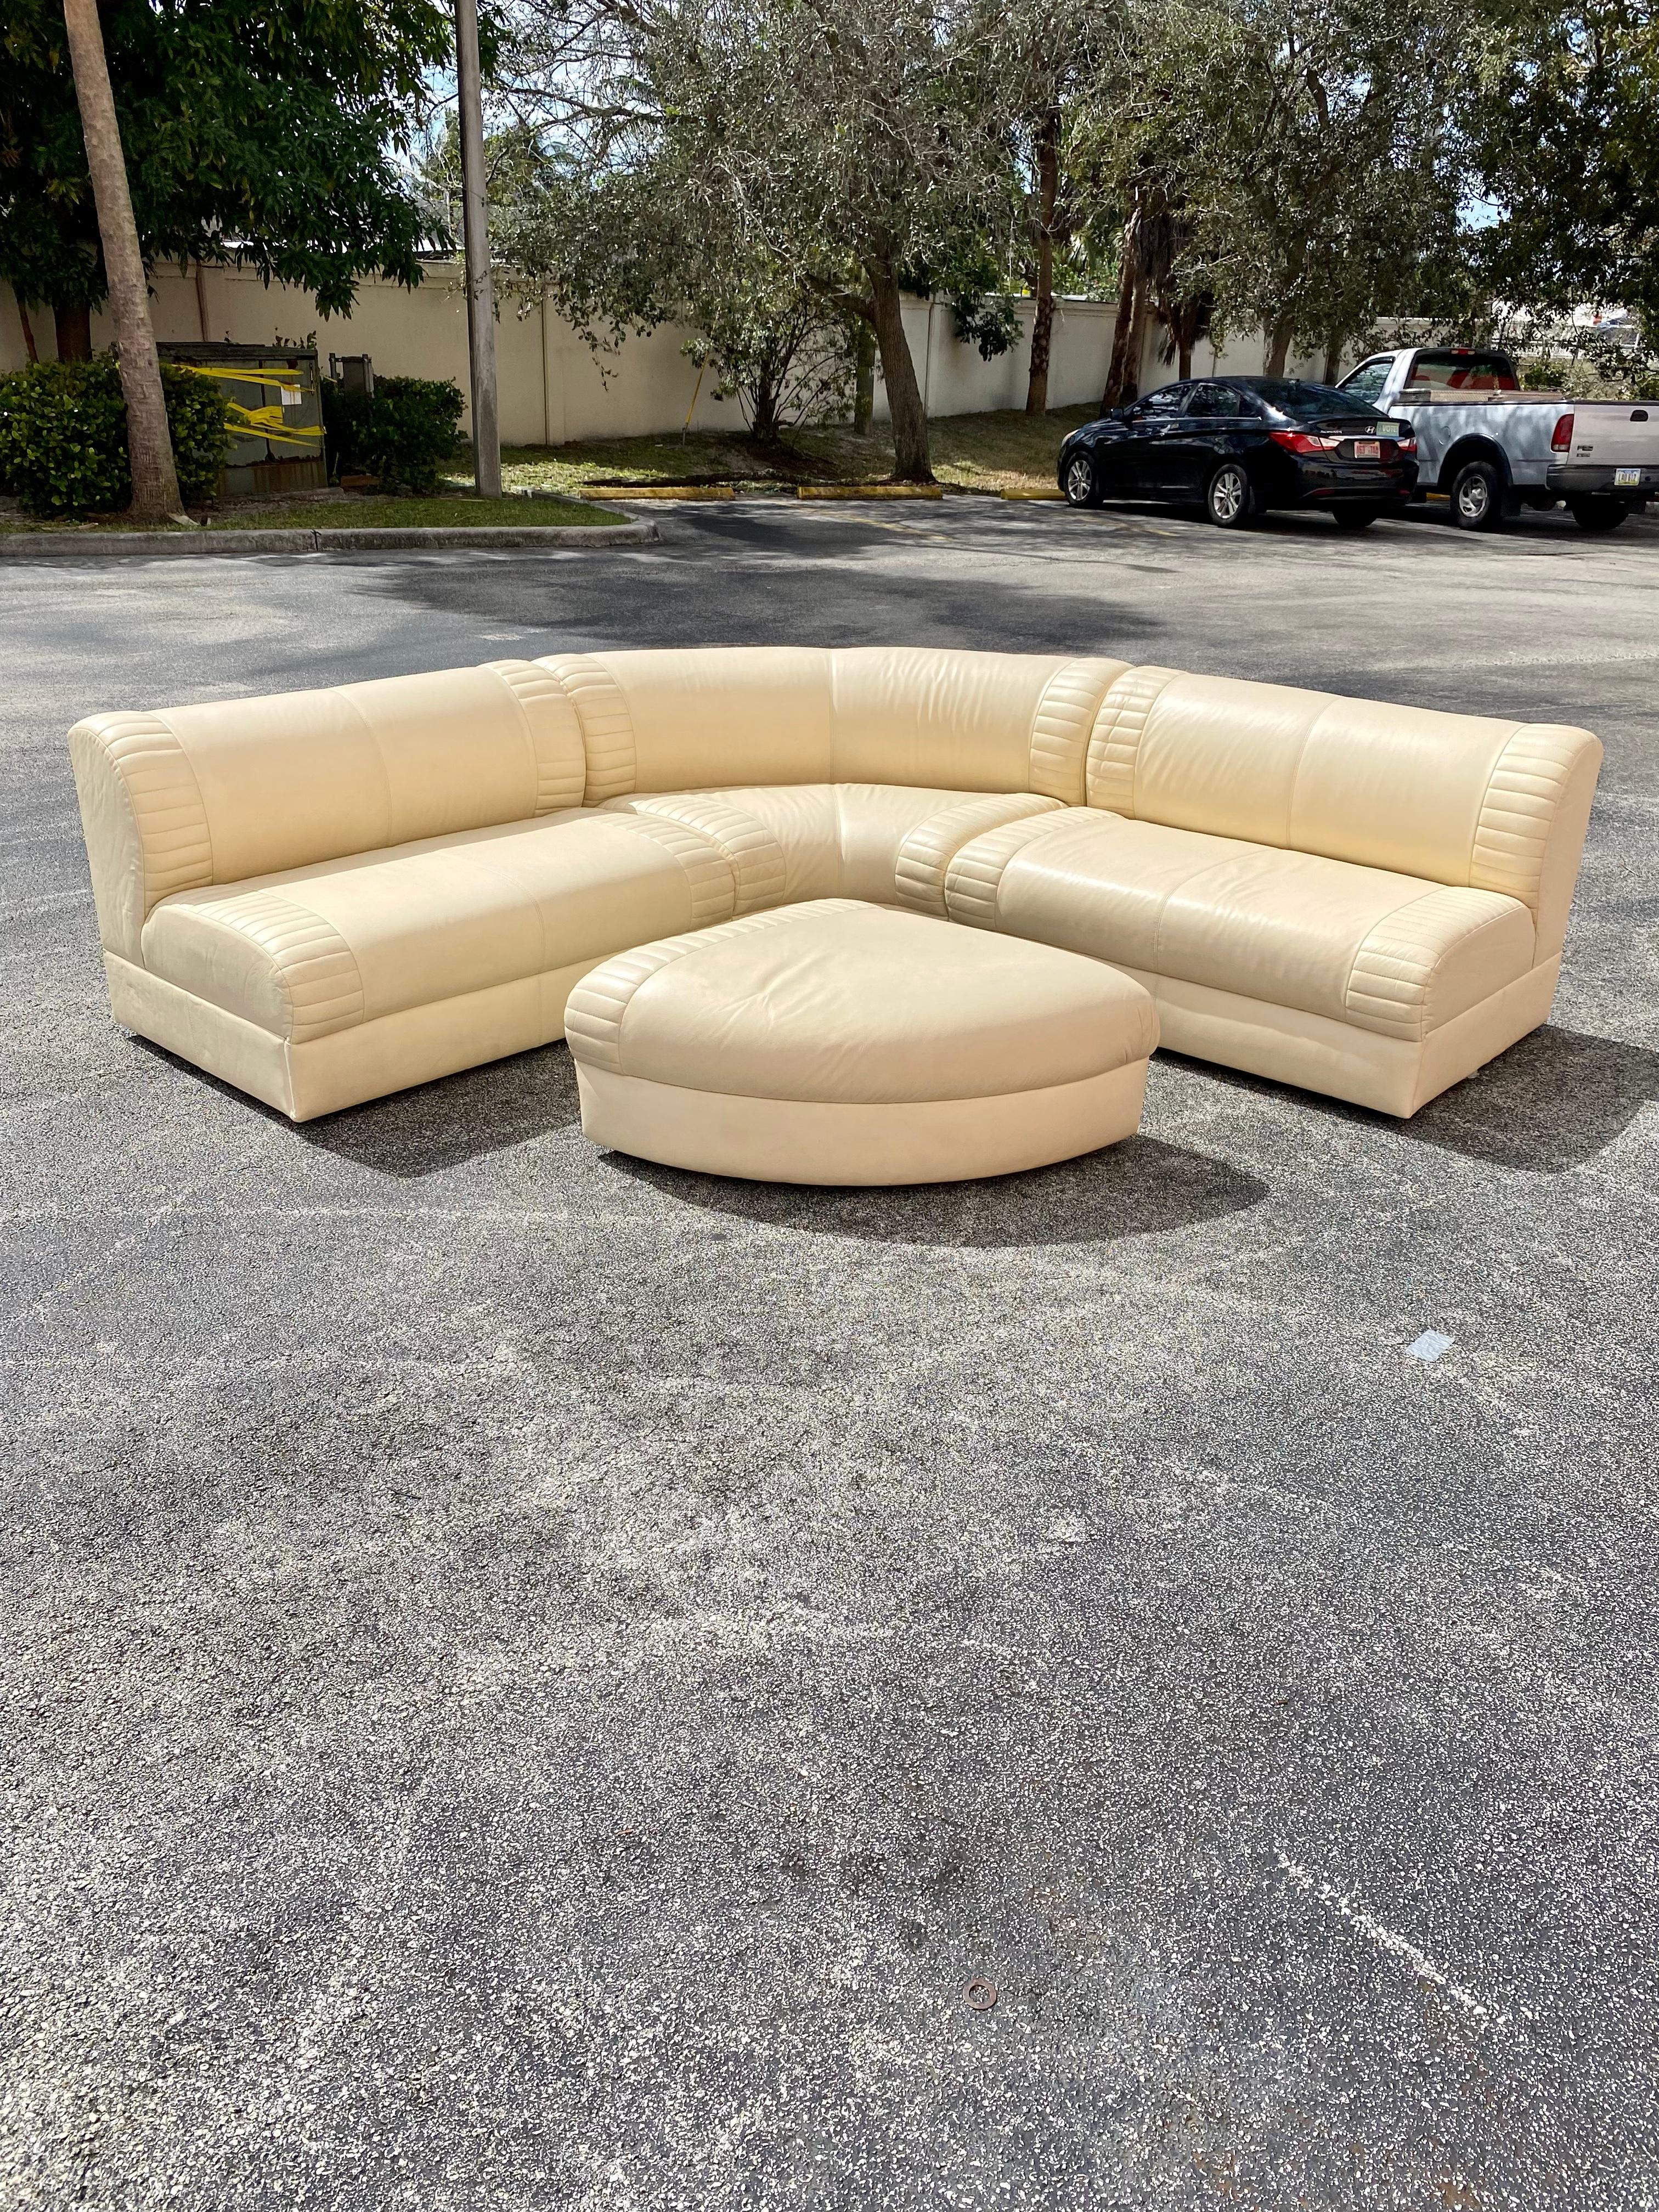 1980s Weiman Serpentine Modular Beige Leather Sectional For Sale 2